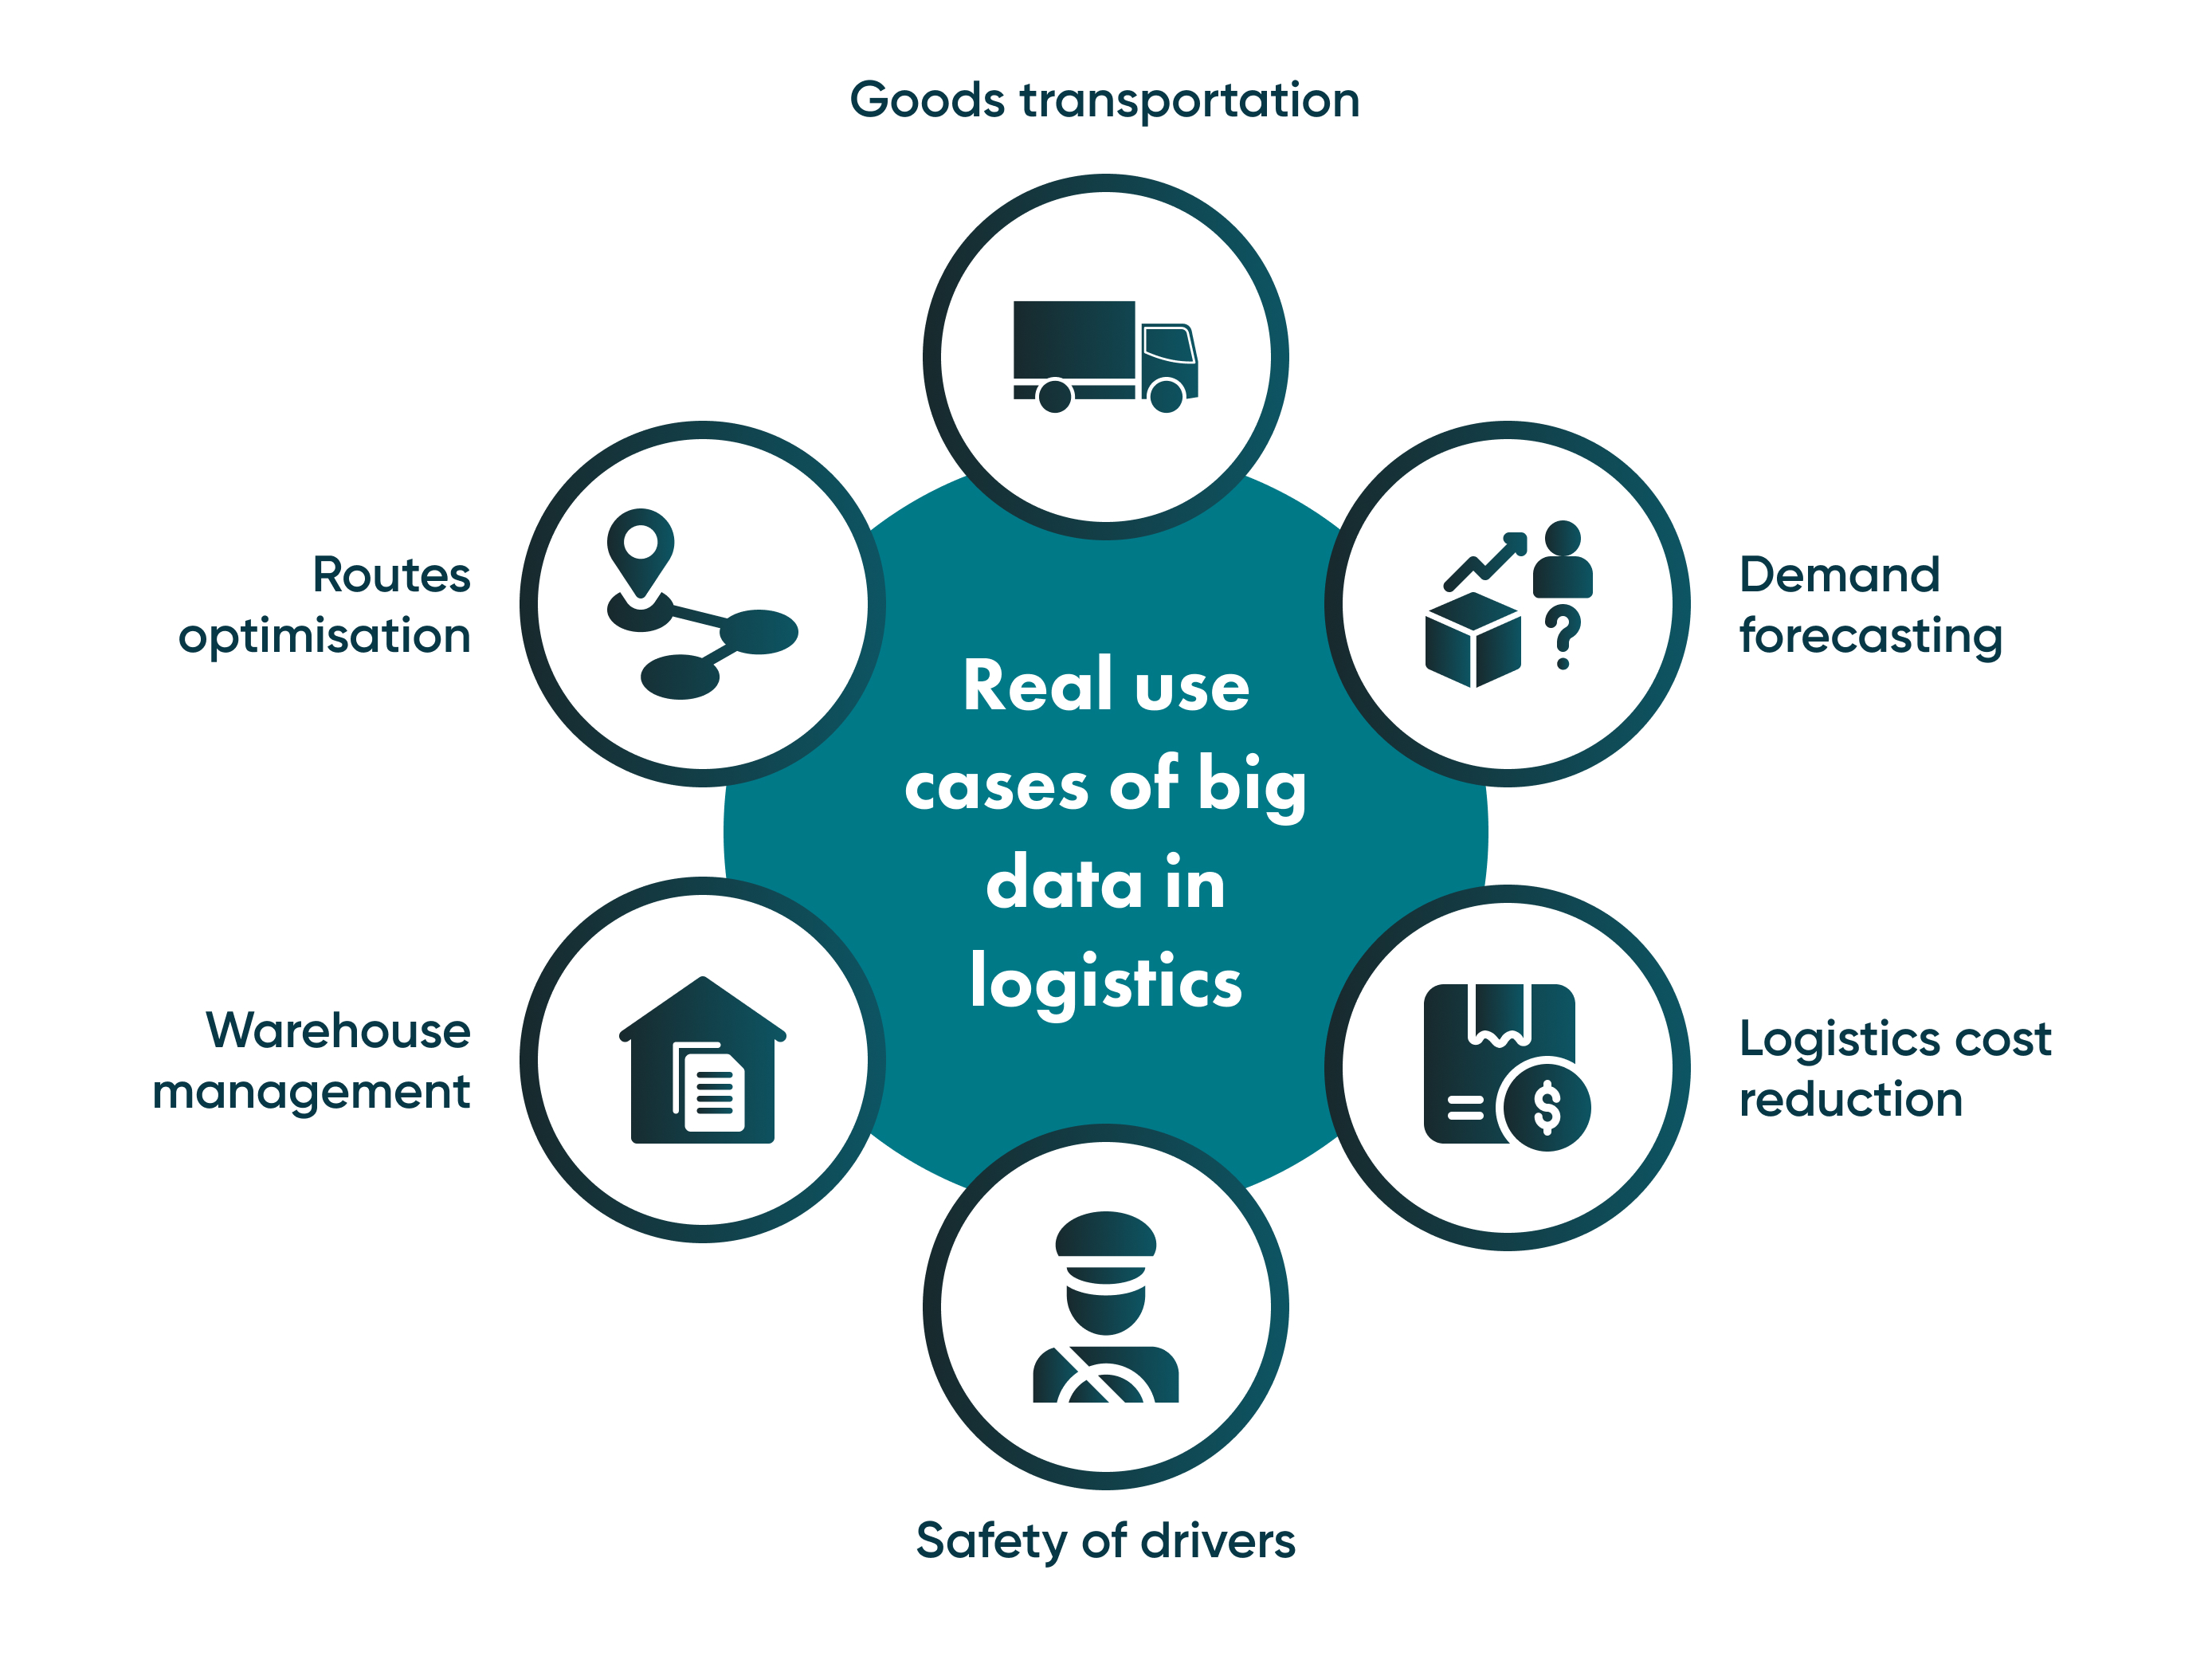 World-renowned companies are searching for different ways to apply big data analytics in logistics and supply chain management